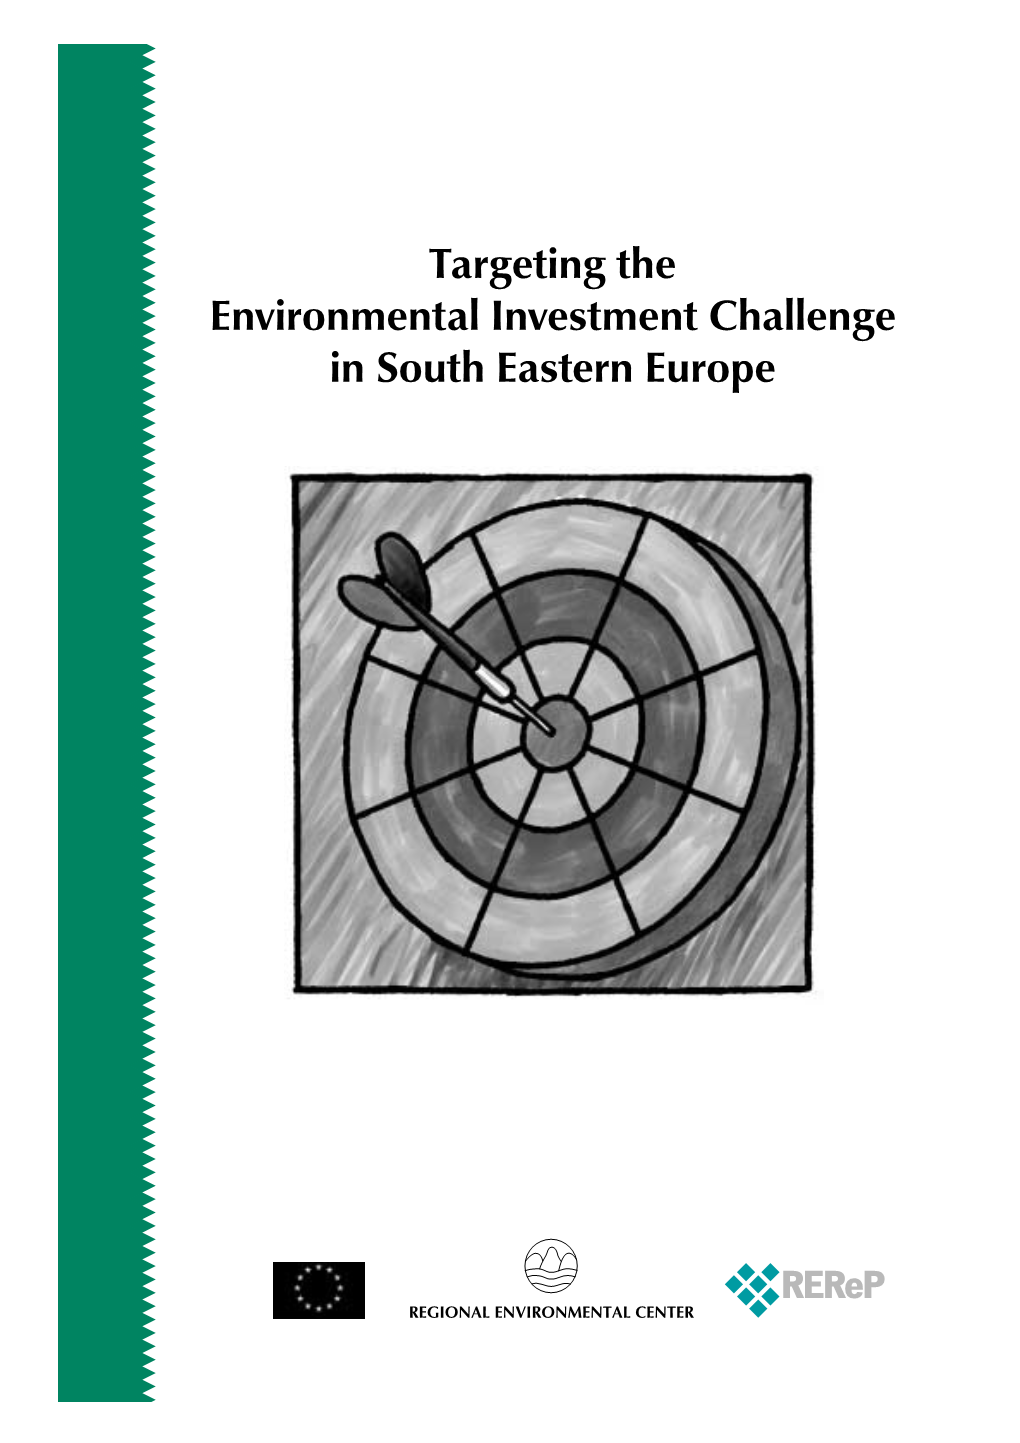 Targeting the Environmental Investment Challenge in South Eastern Europe